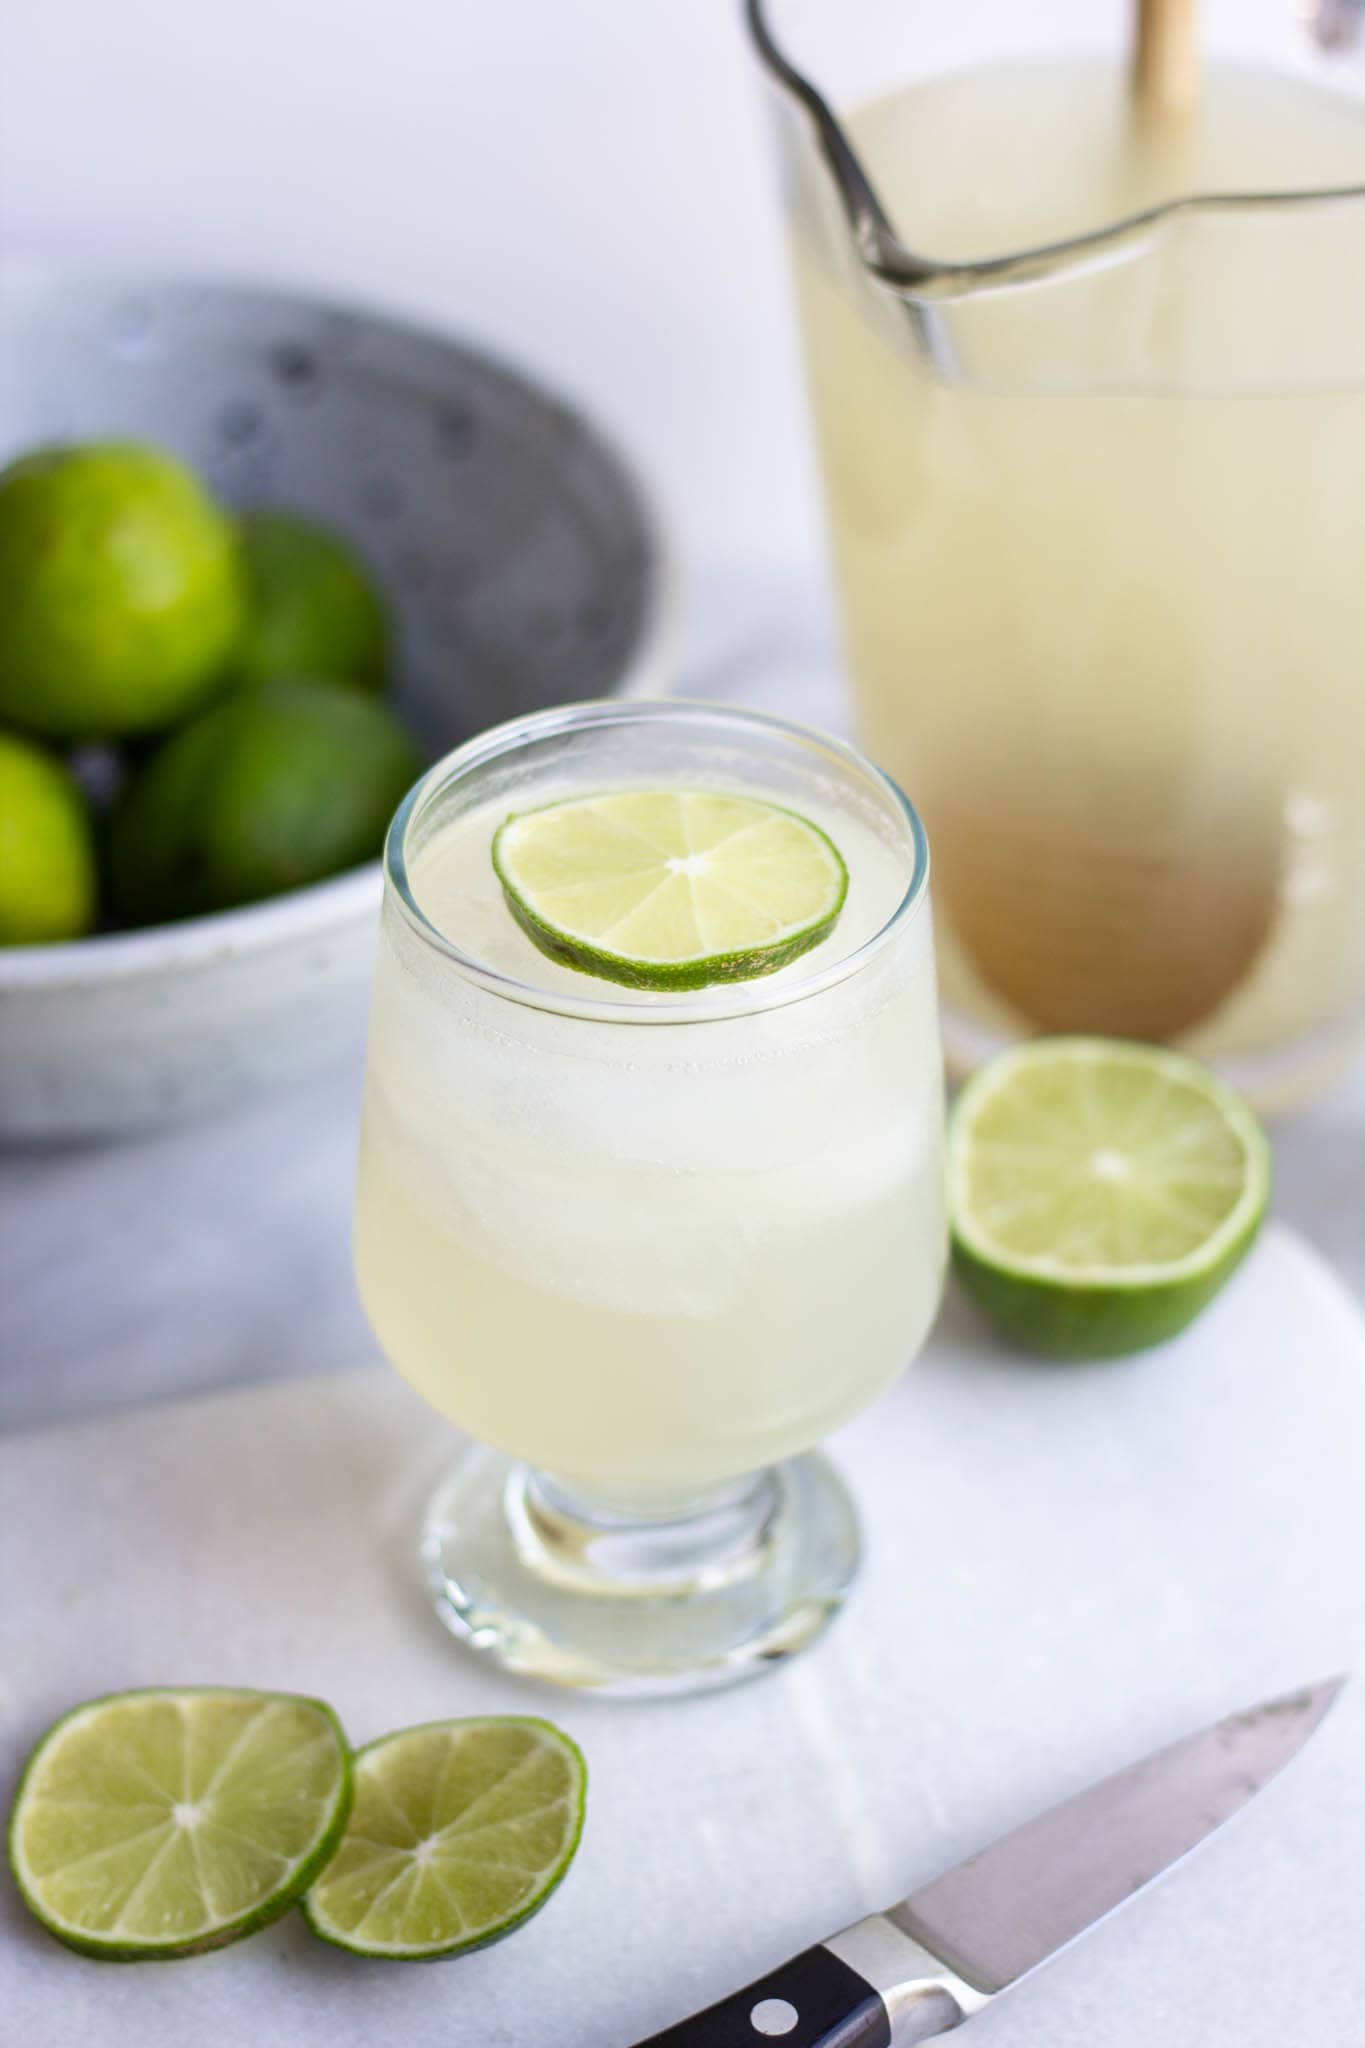 A glass of coconut water limeade with fresh sliced lime in the glass.